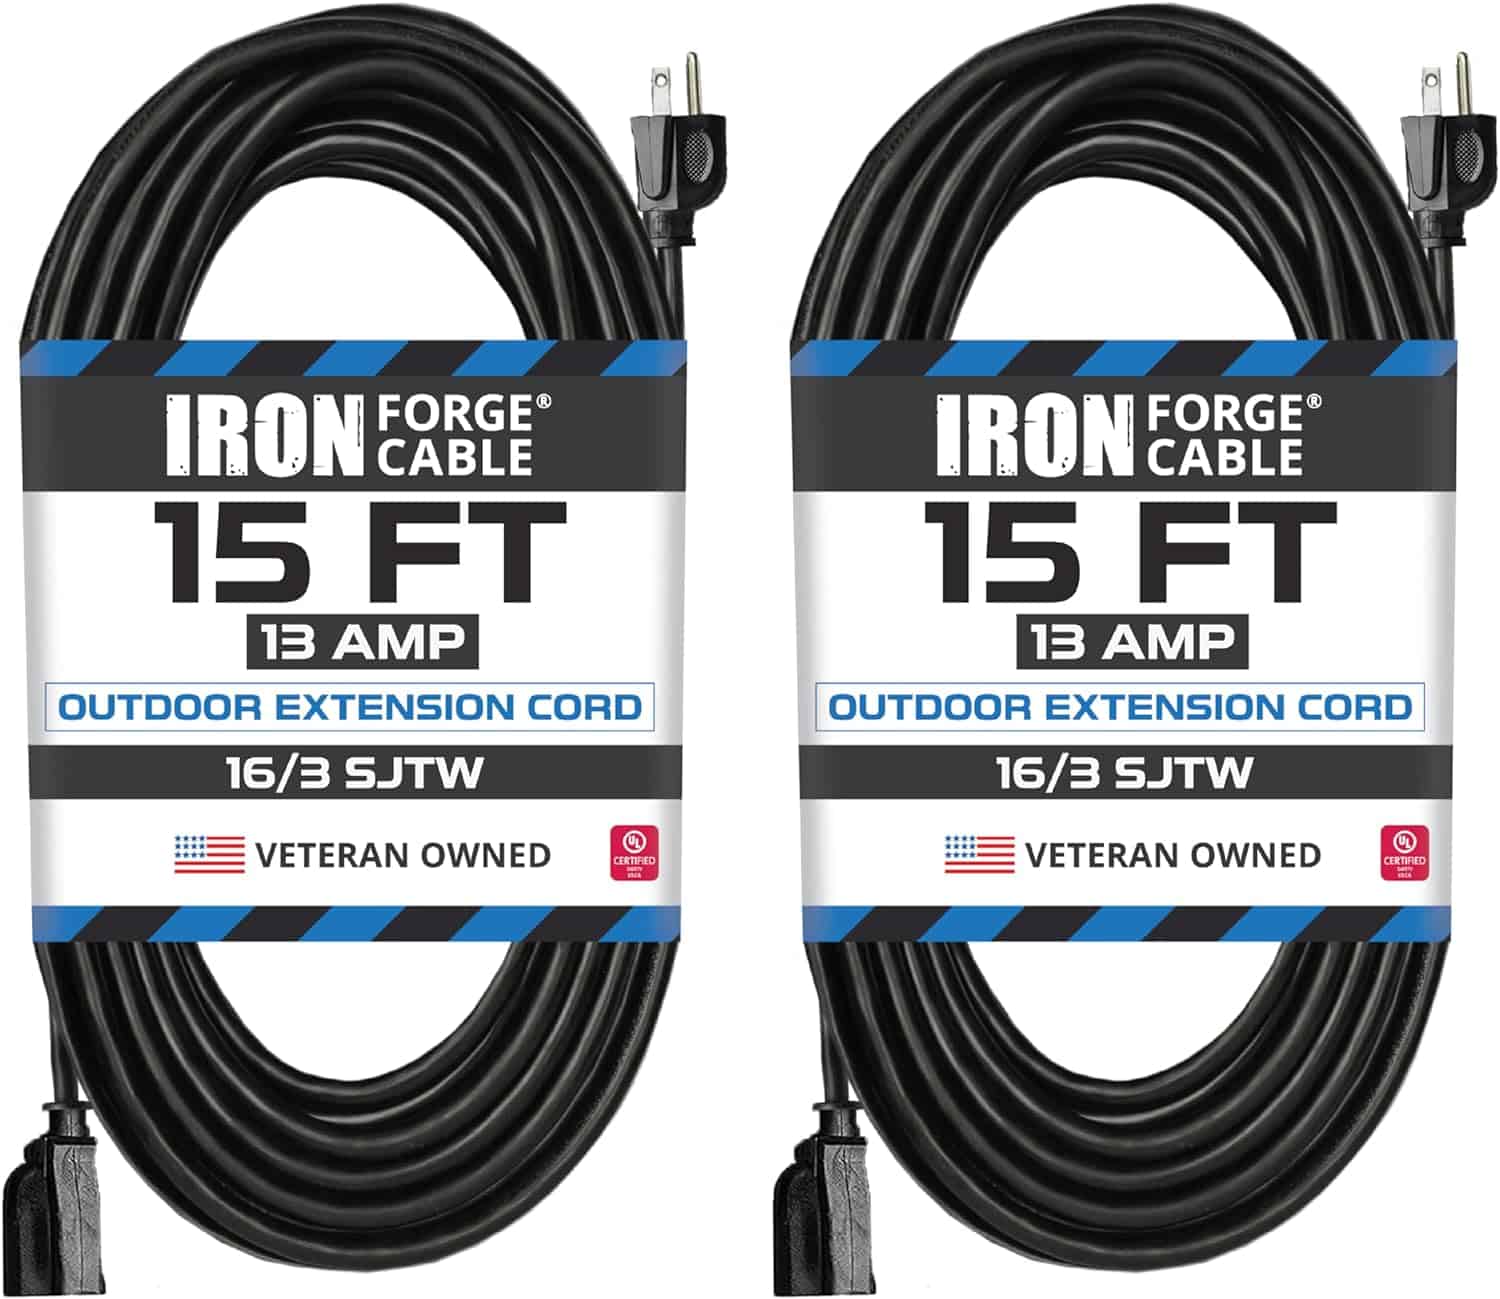 Iron Forge Cable Black Extension Cord 2 Pack 15 Ft, 16 3 Black 15 Ft Extension Cord Indoor Outdoor Use, 3 Prong Weatherproof Exterior Extension Cord 1